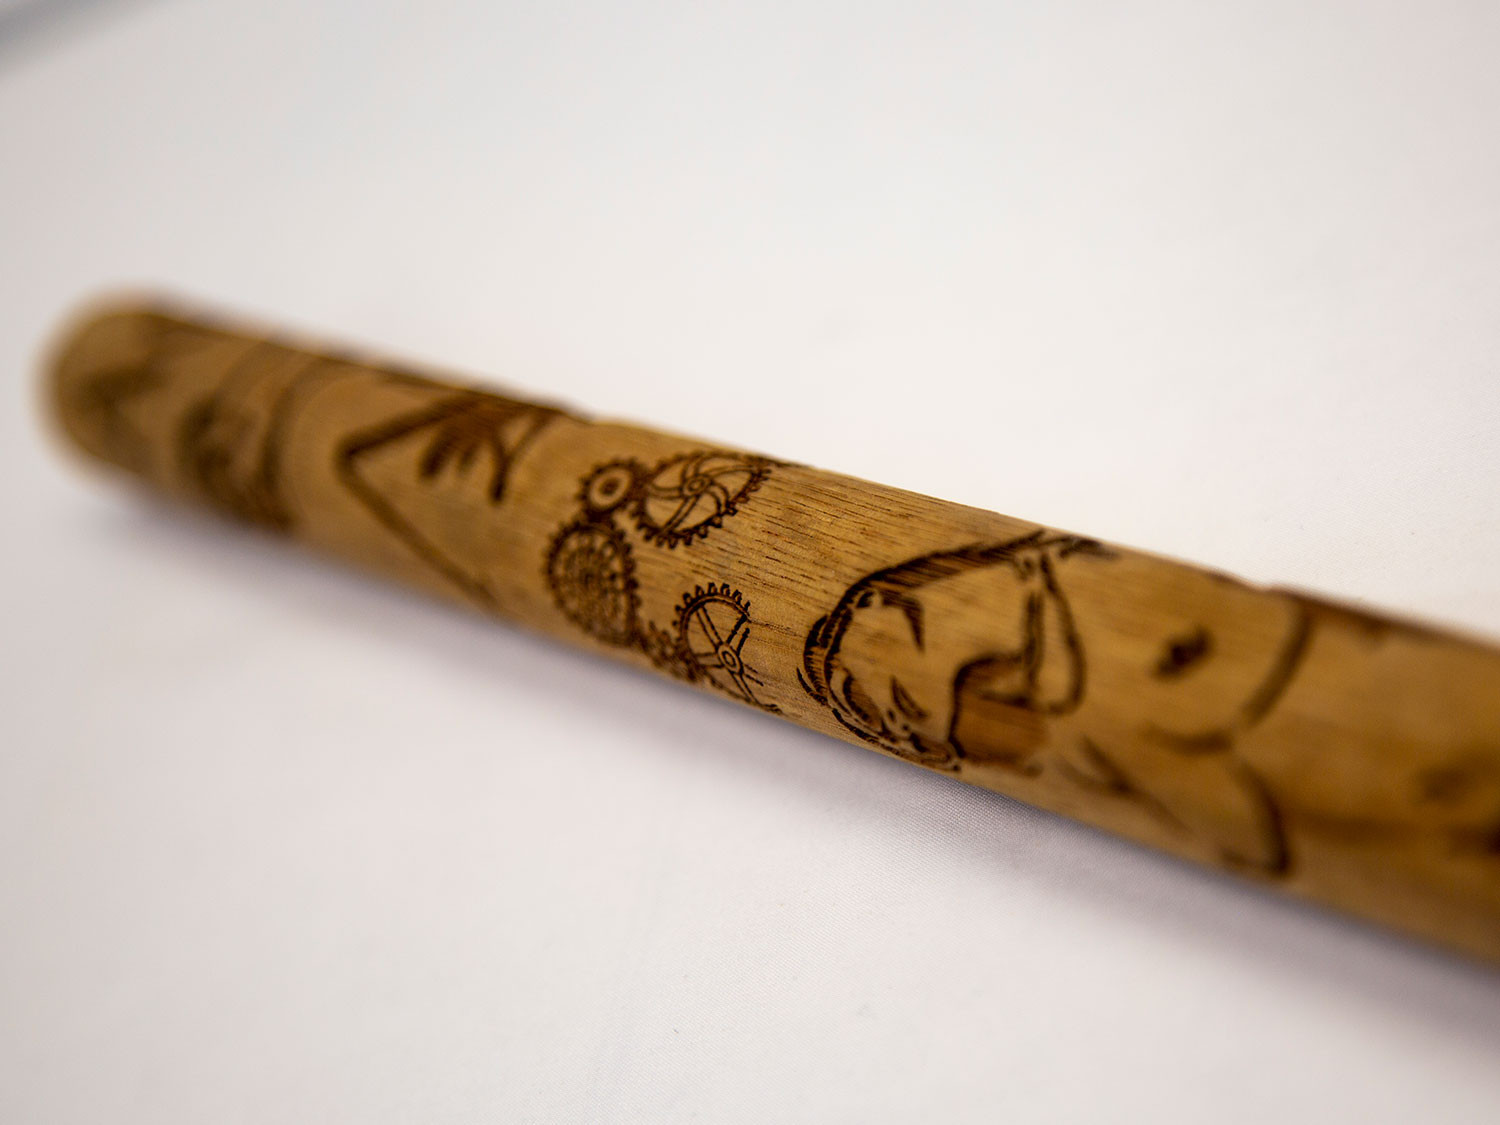 wooden stick with different pictures lasered onto it.